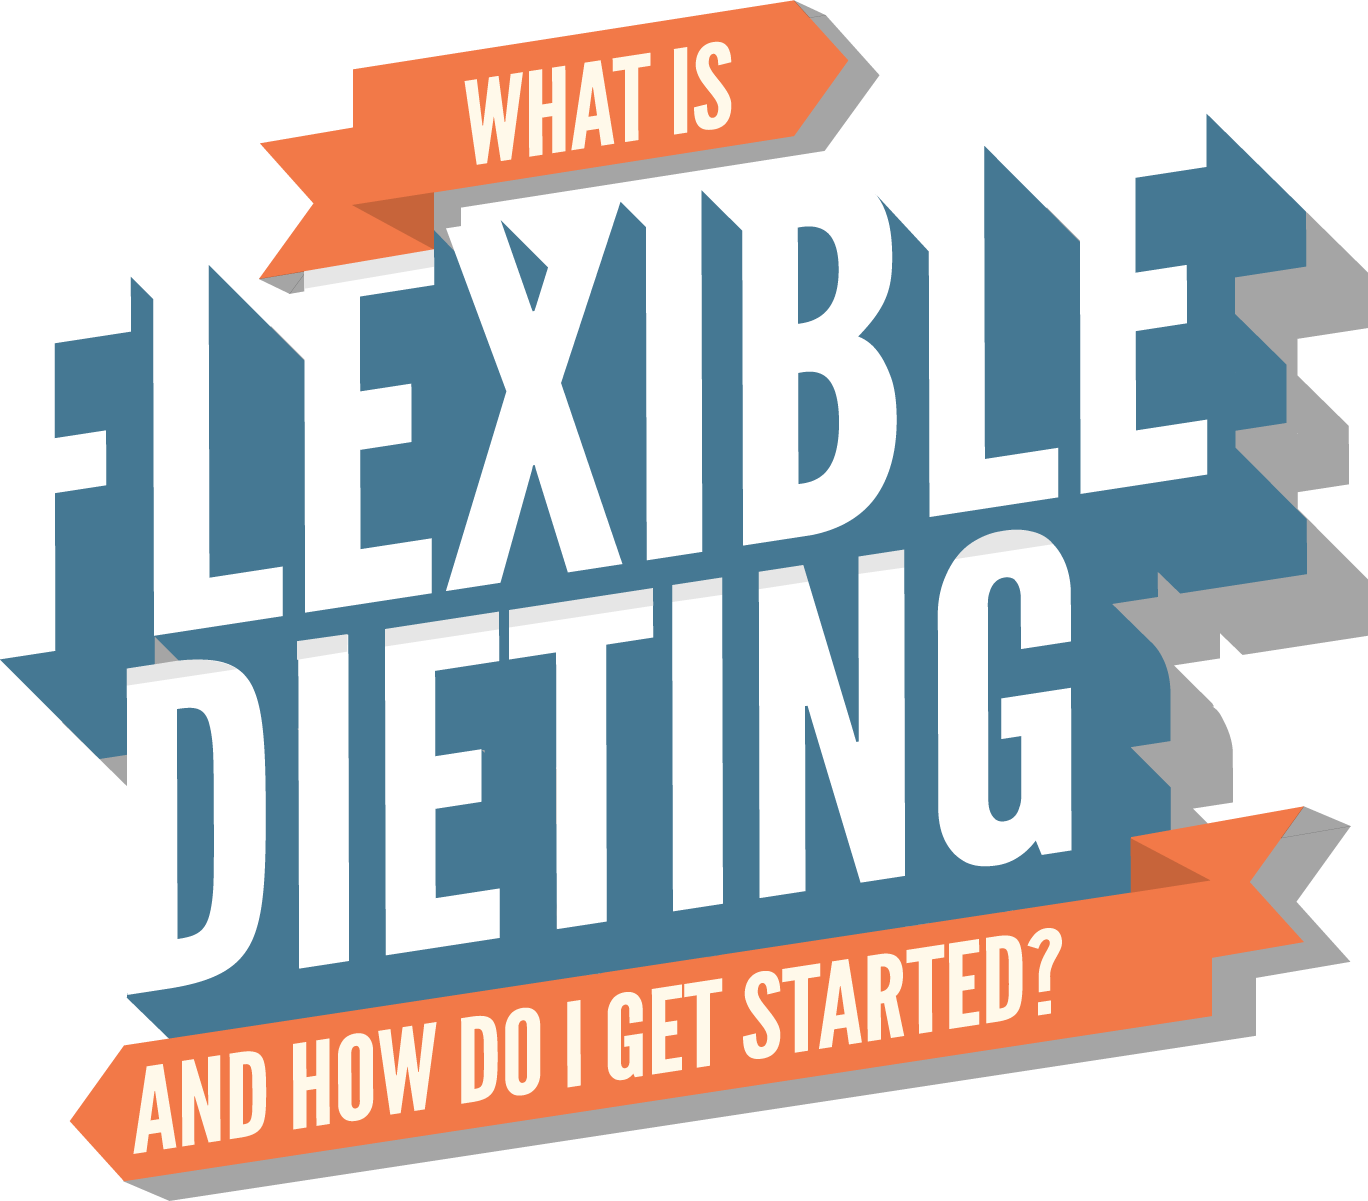 Flexible Dieting - What is it and how do I get started?